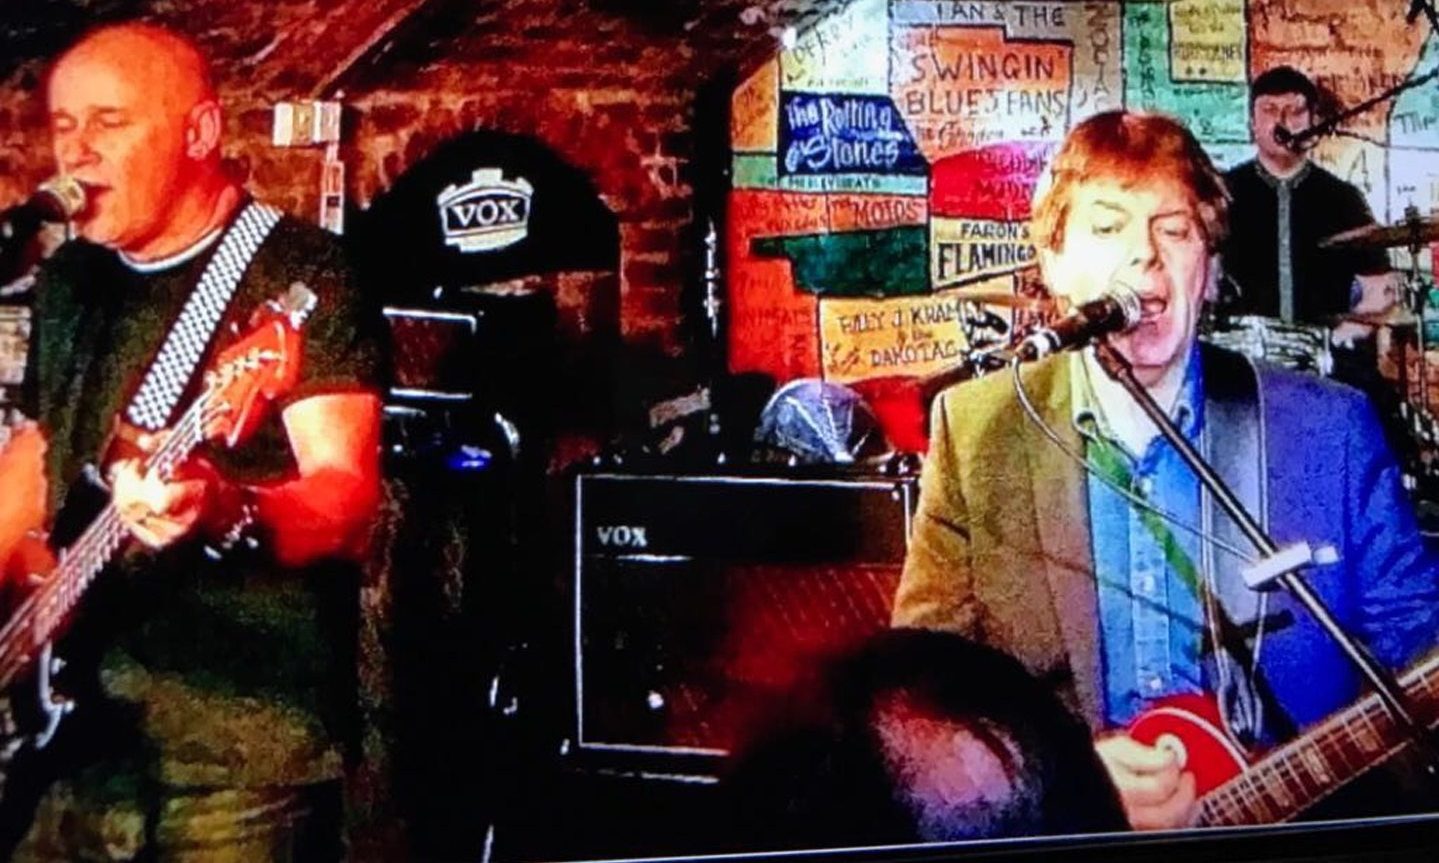 Steve McDonald, right, performs with McDonald's Farm at the Cavern in Liverpool. Image: Steve McDonald